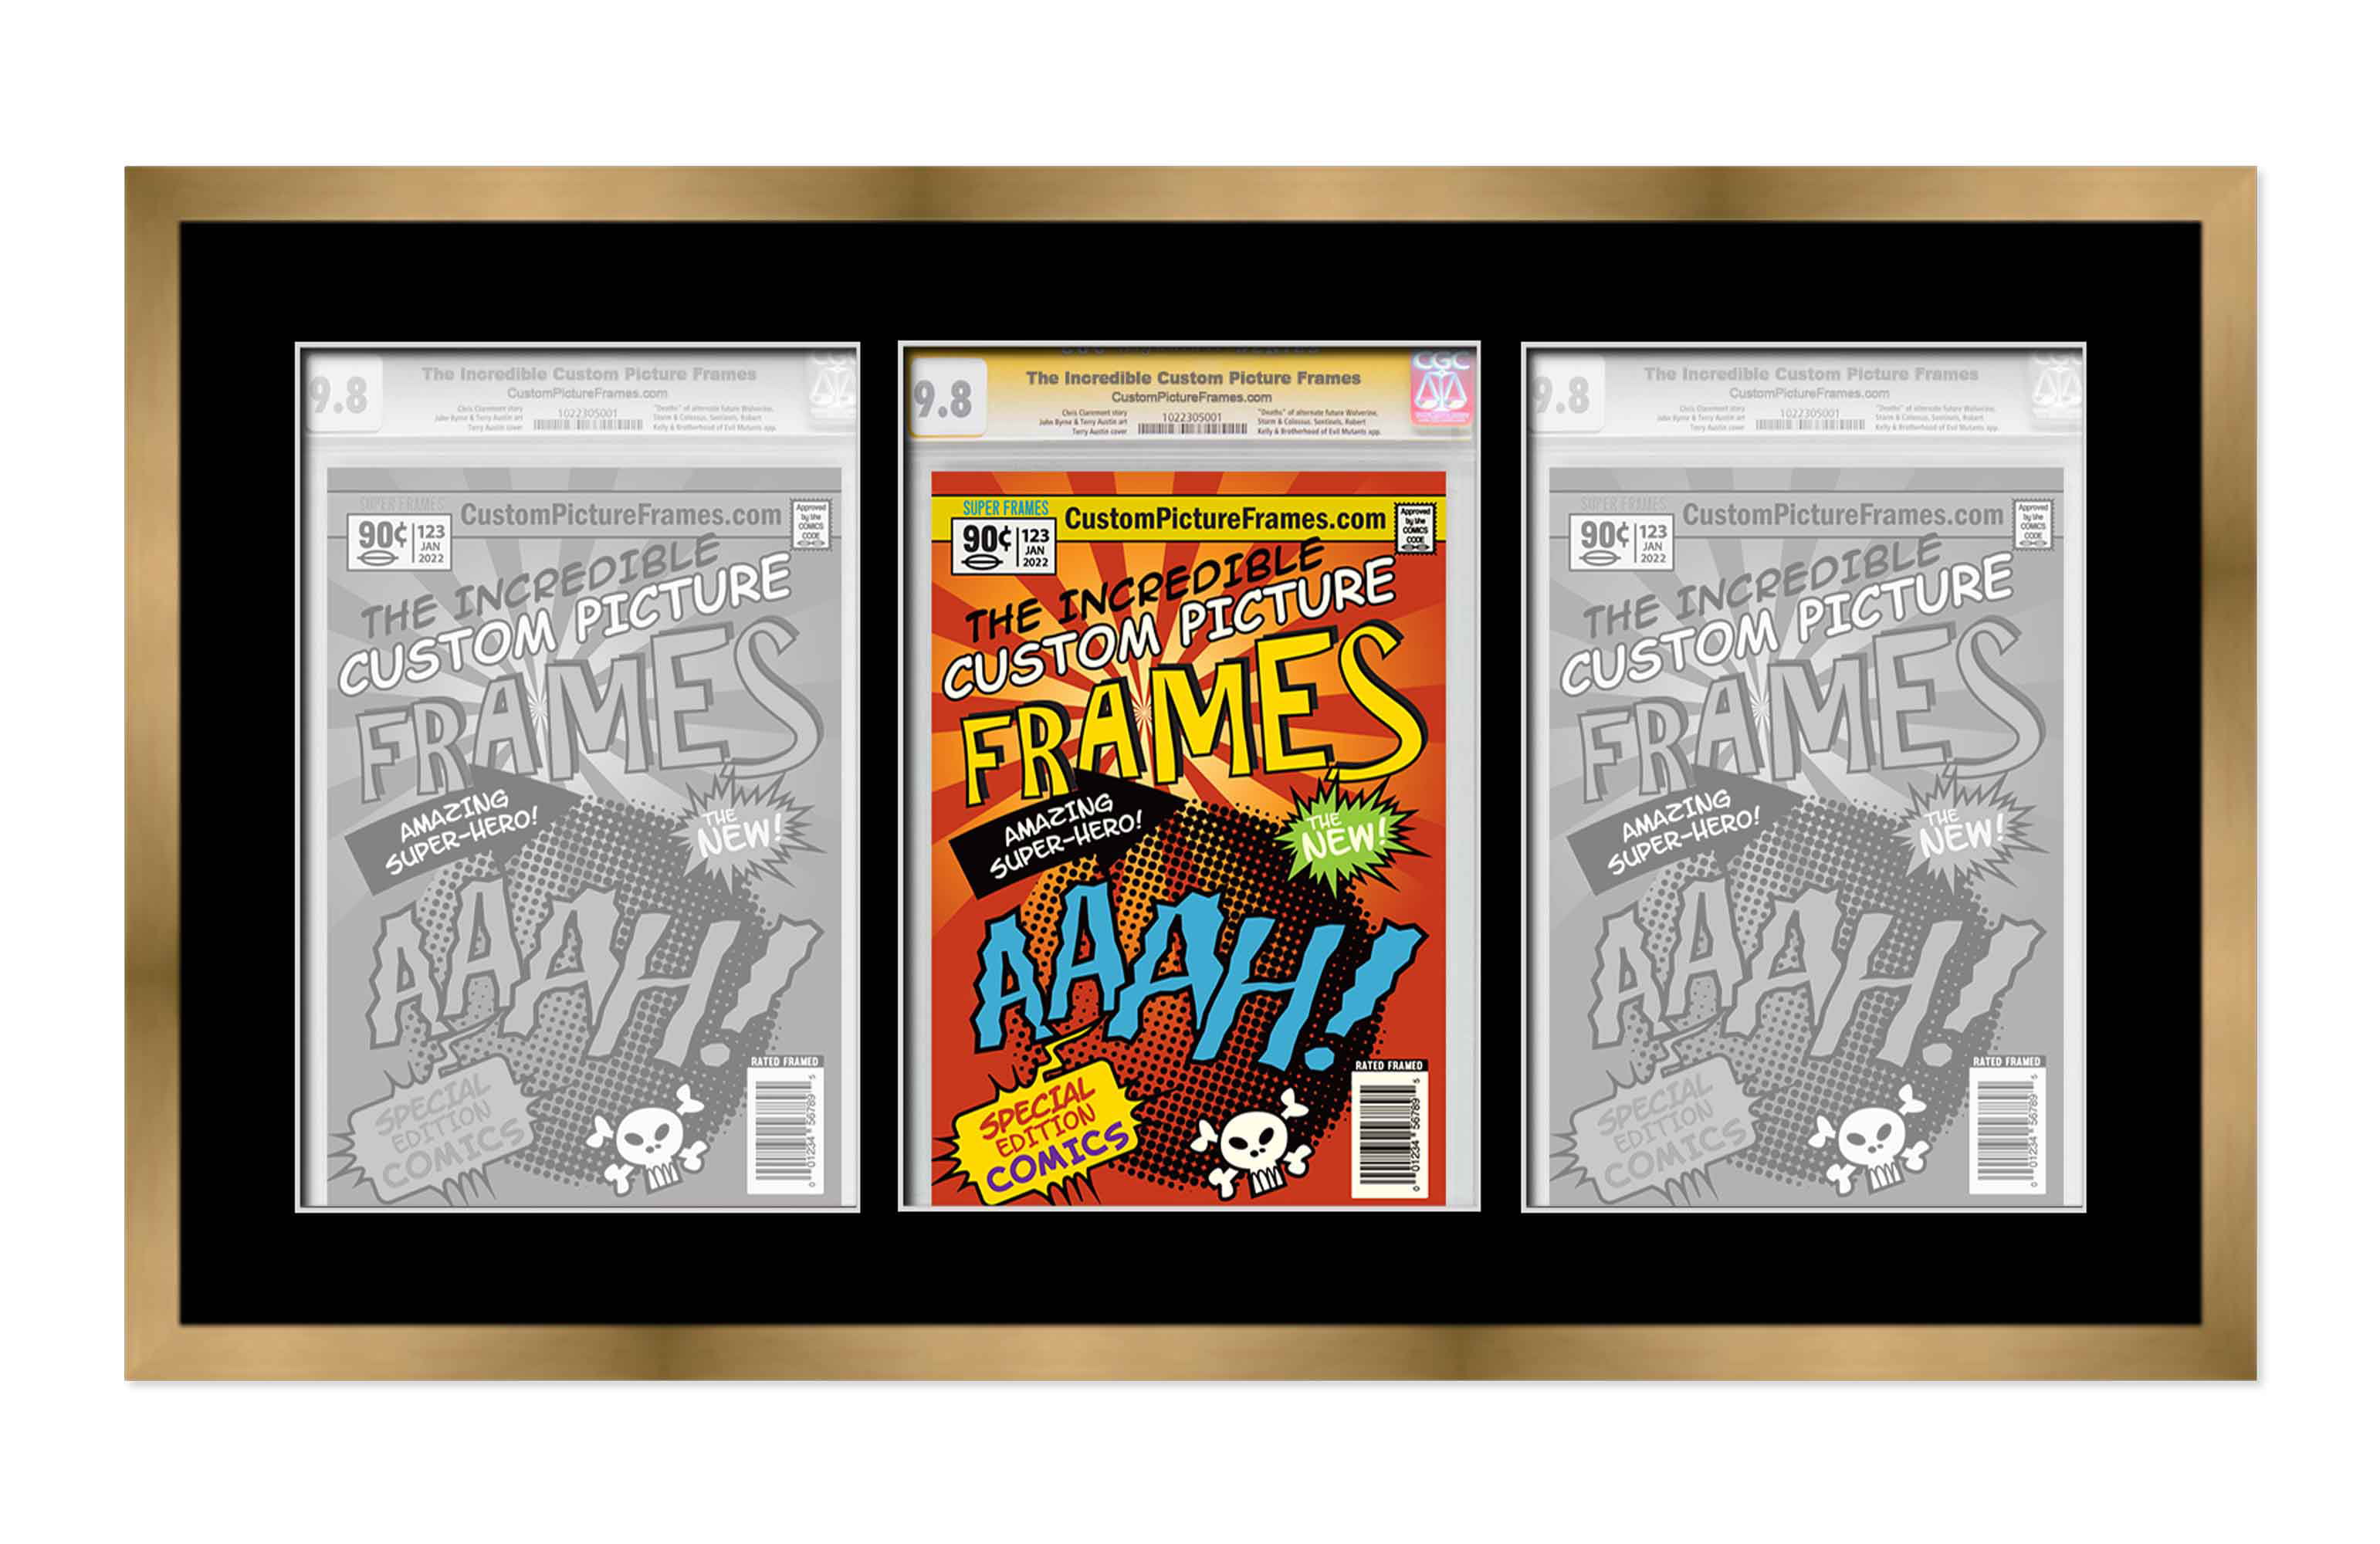 Gold Comic Book Frame with Black Mat - 3 Openings to Display 3 CGC